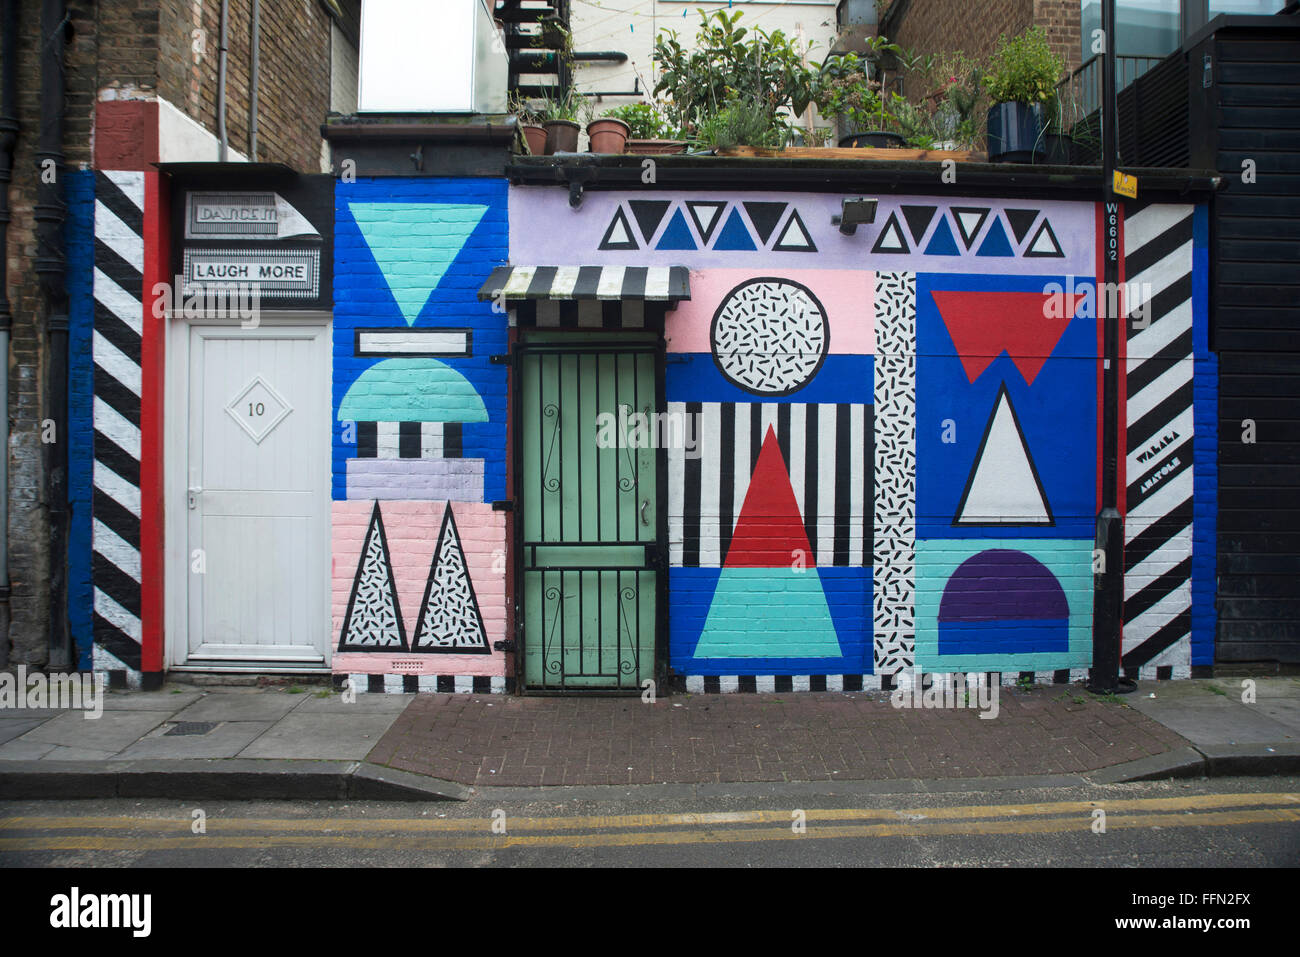 Shoreditch & Hoxton area street art, London. A building exterior painted with a colourful geometric mural. Stock Photo